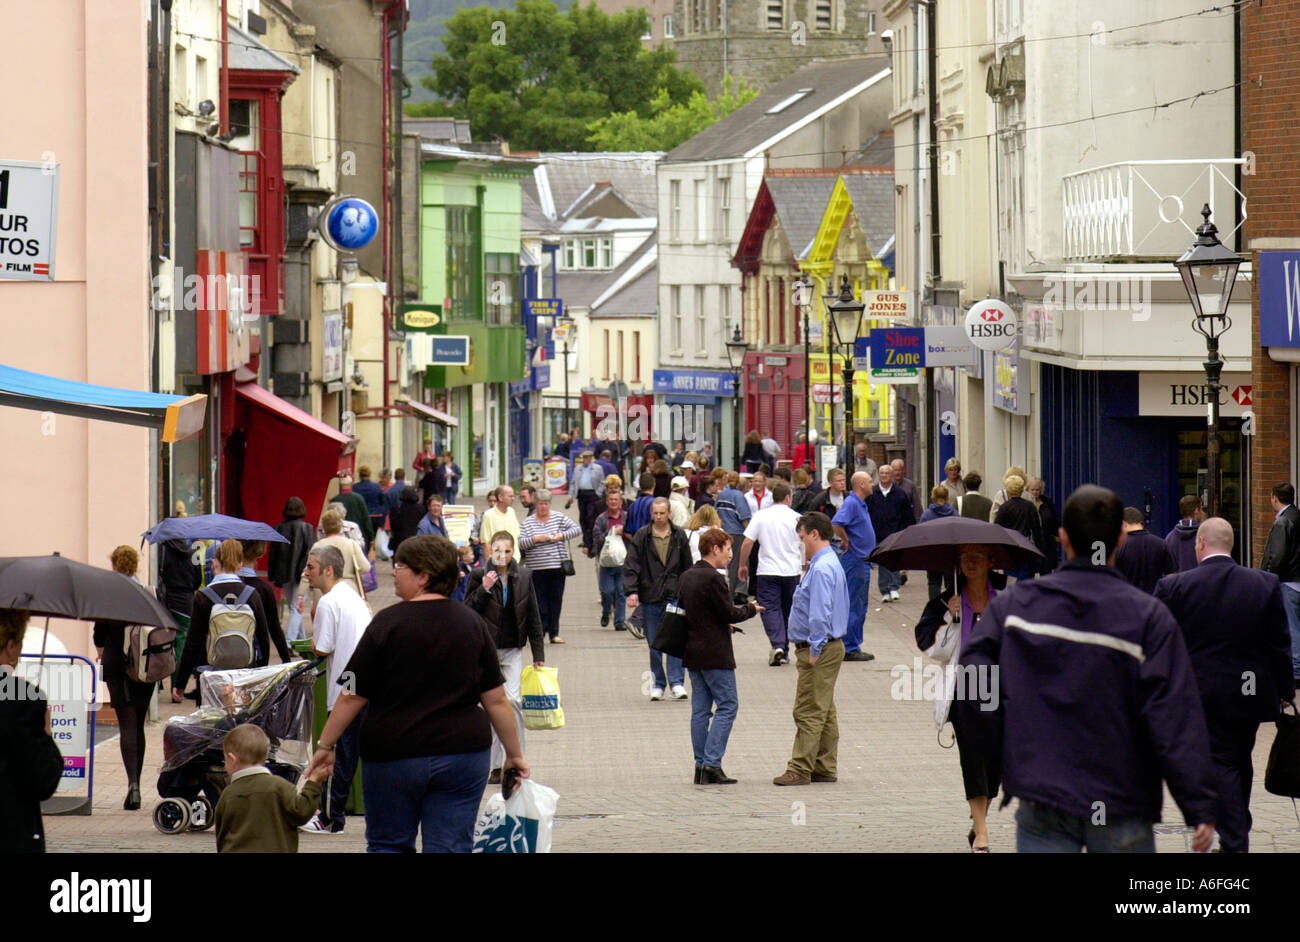 General view of shopping street with people shopping at Merthyr Tydfil in the South Wales Valleys UK Stock Photo